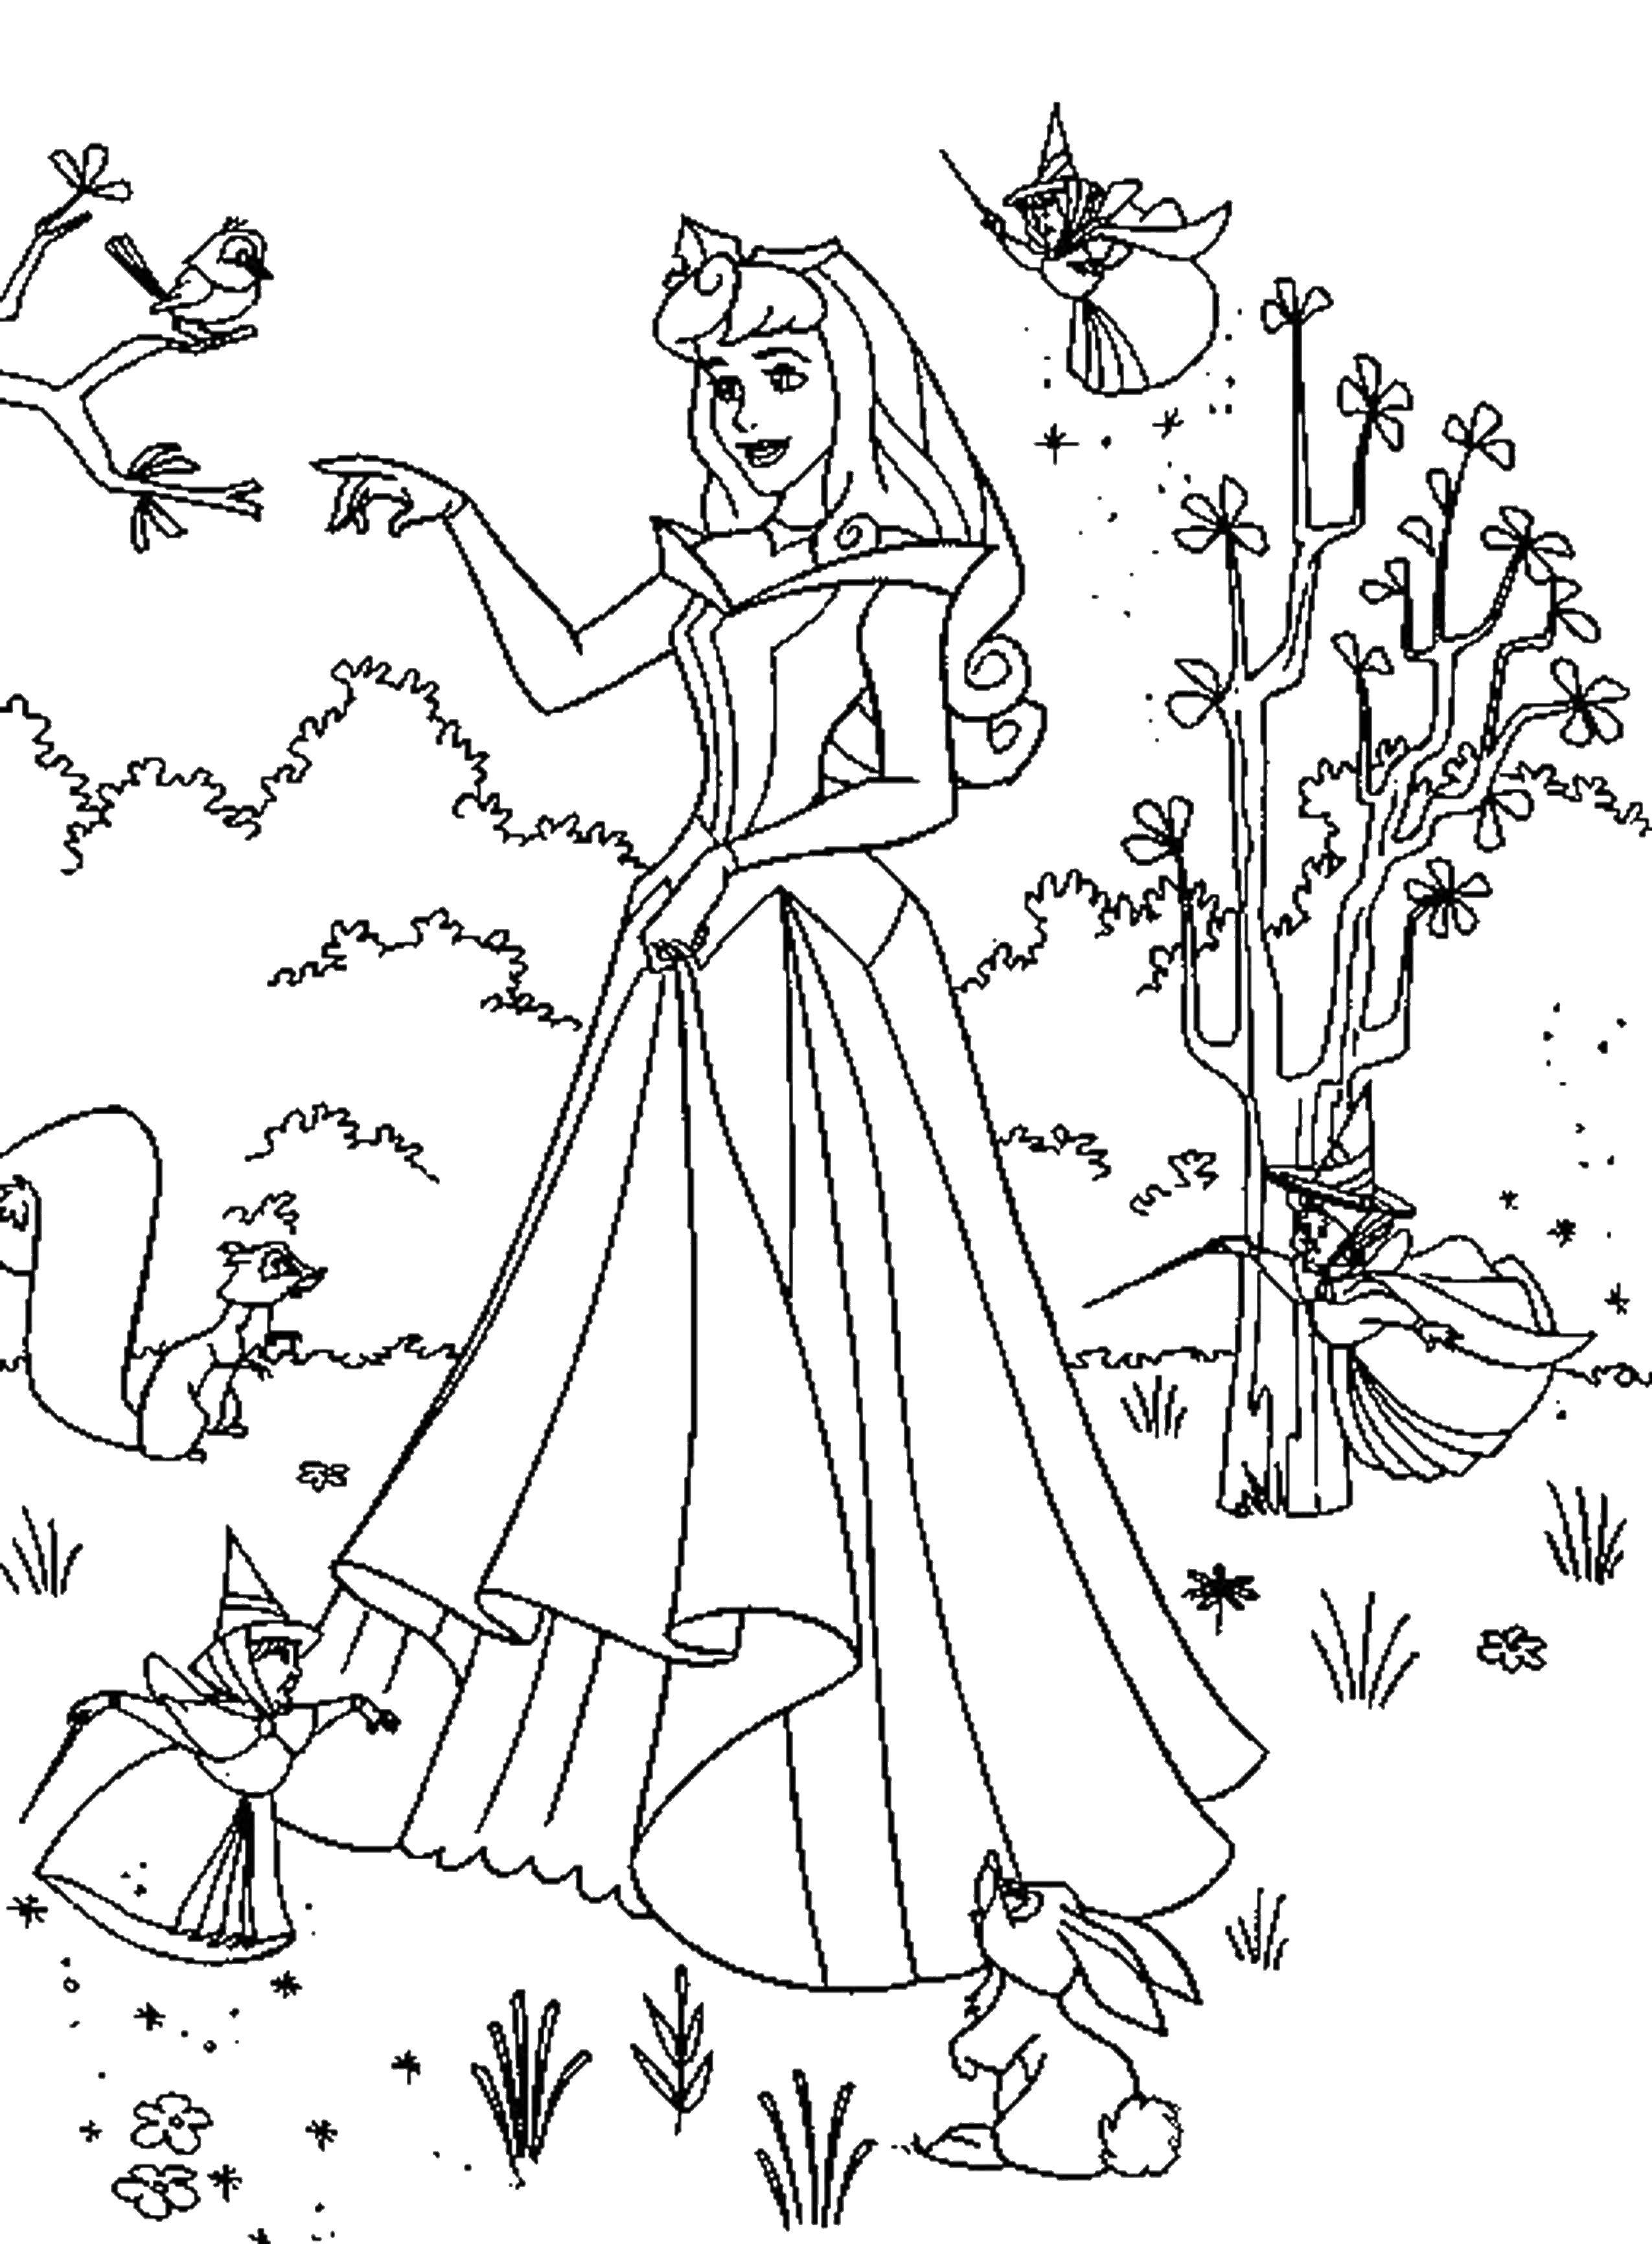 Blessed Aurora coloring book for kids